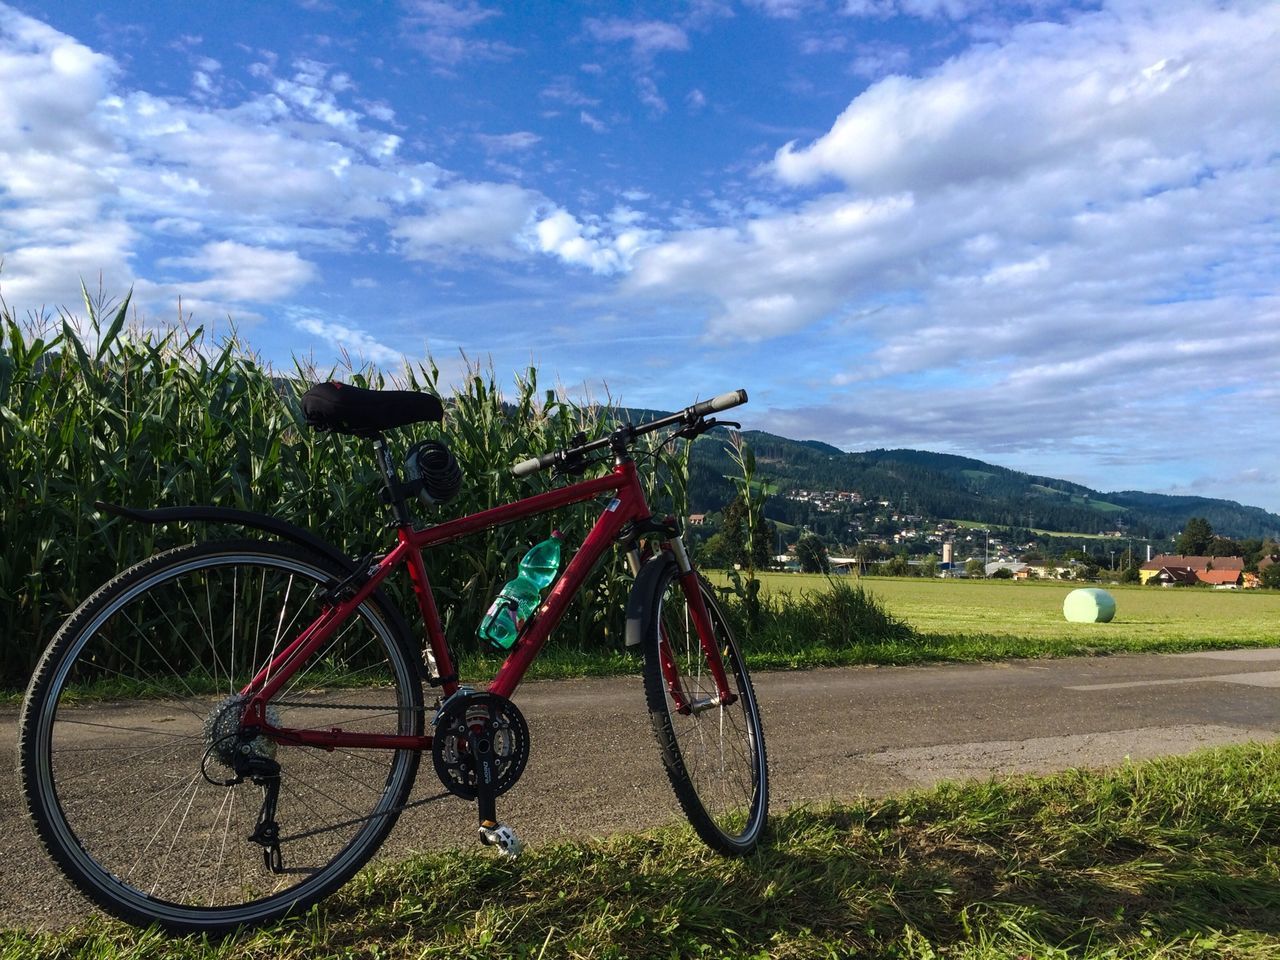 bicycle, transportation, land vehicle, sky, mode of transport, grass, cloud - sky, stationary, field, landscape, parking, parked, cloud, mountain, grassy, cloudy, tranquility, road, tranquil scene, day